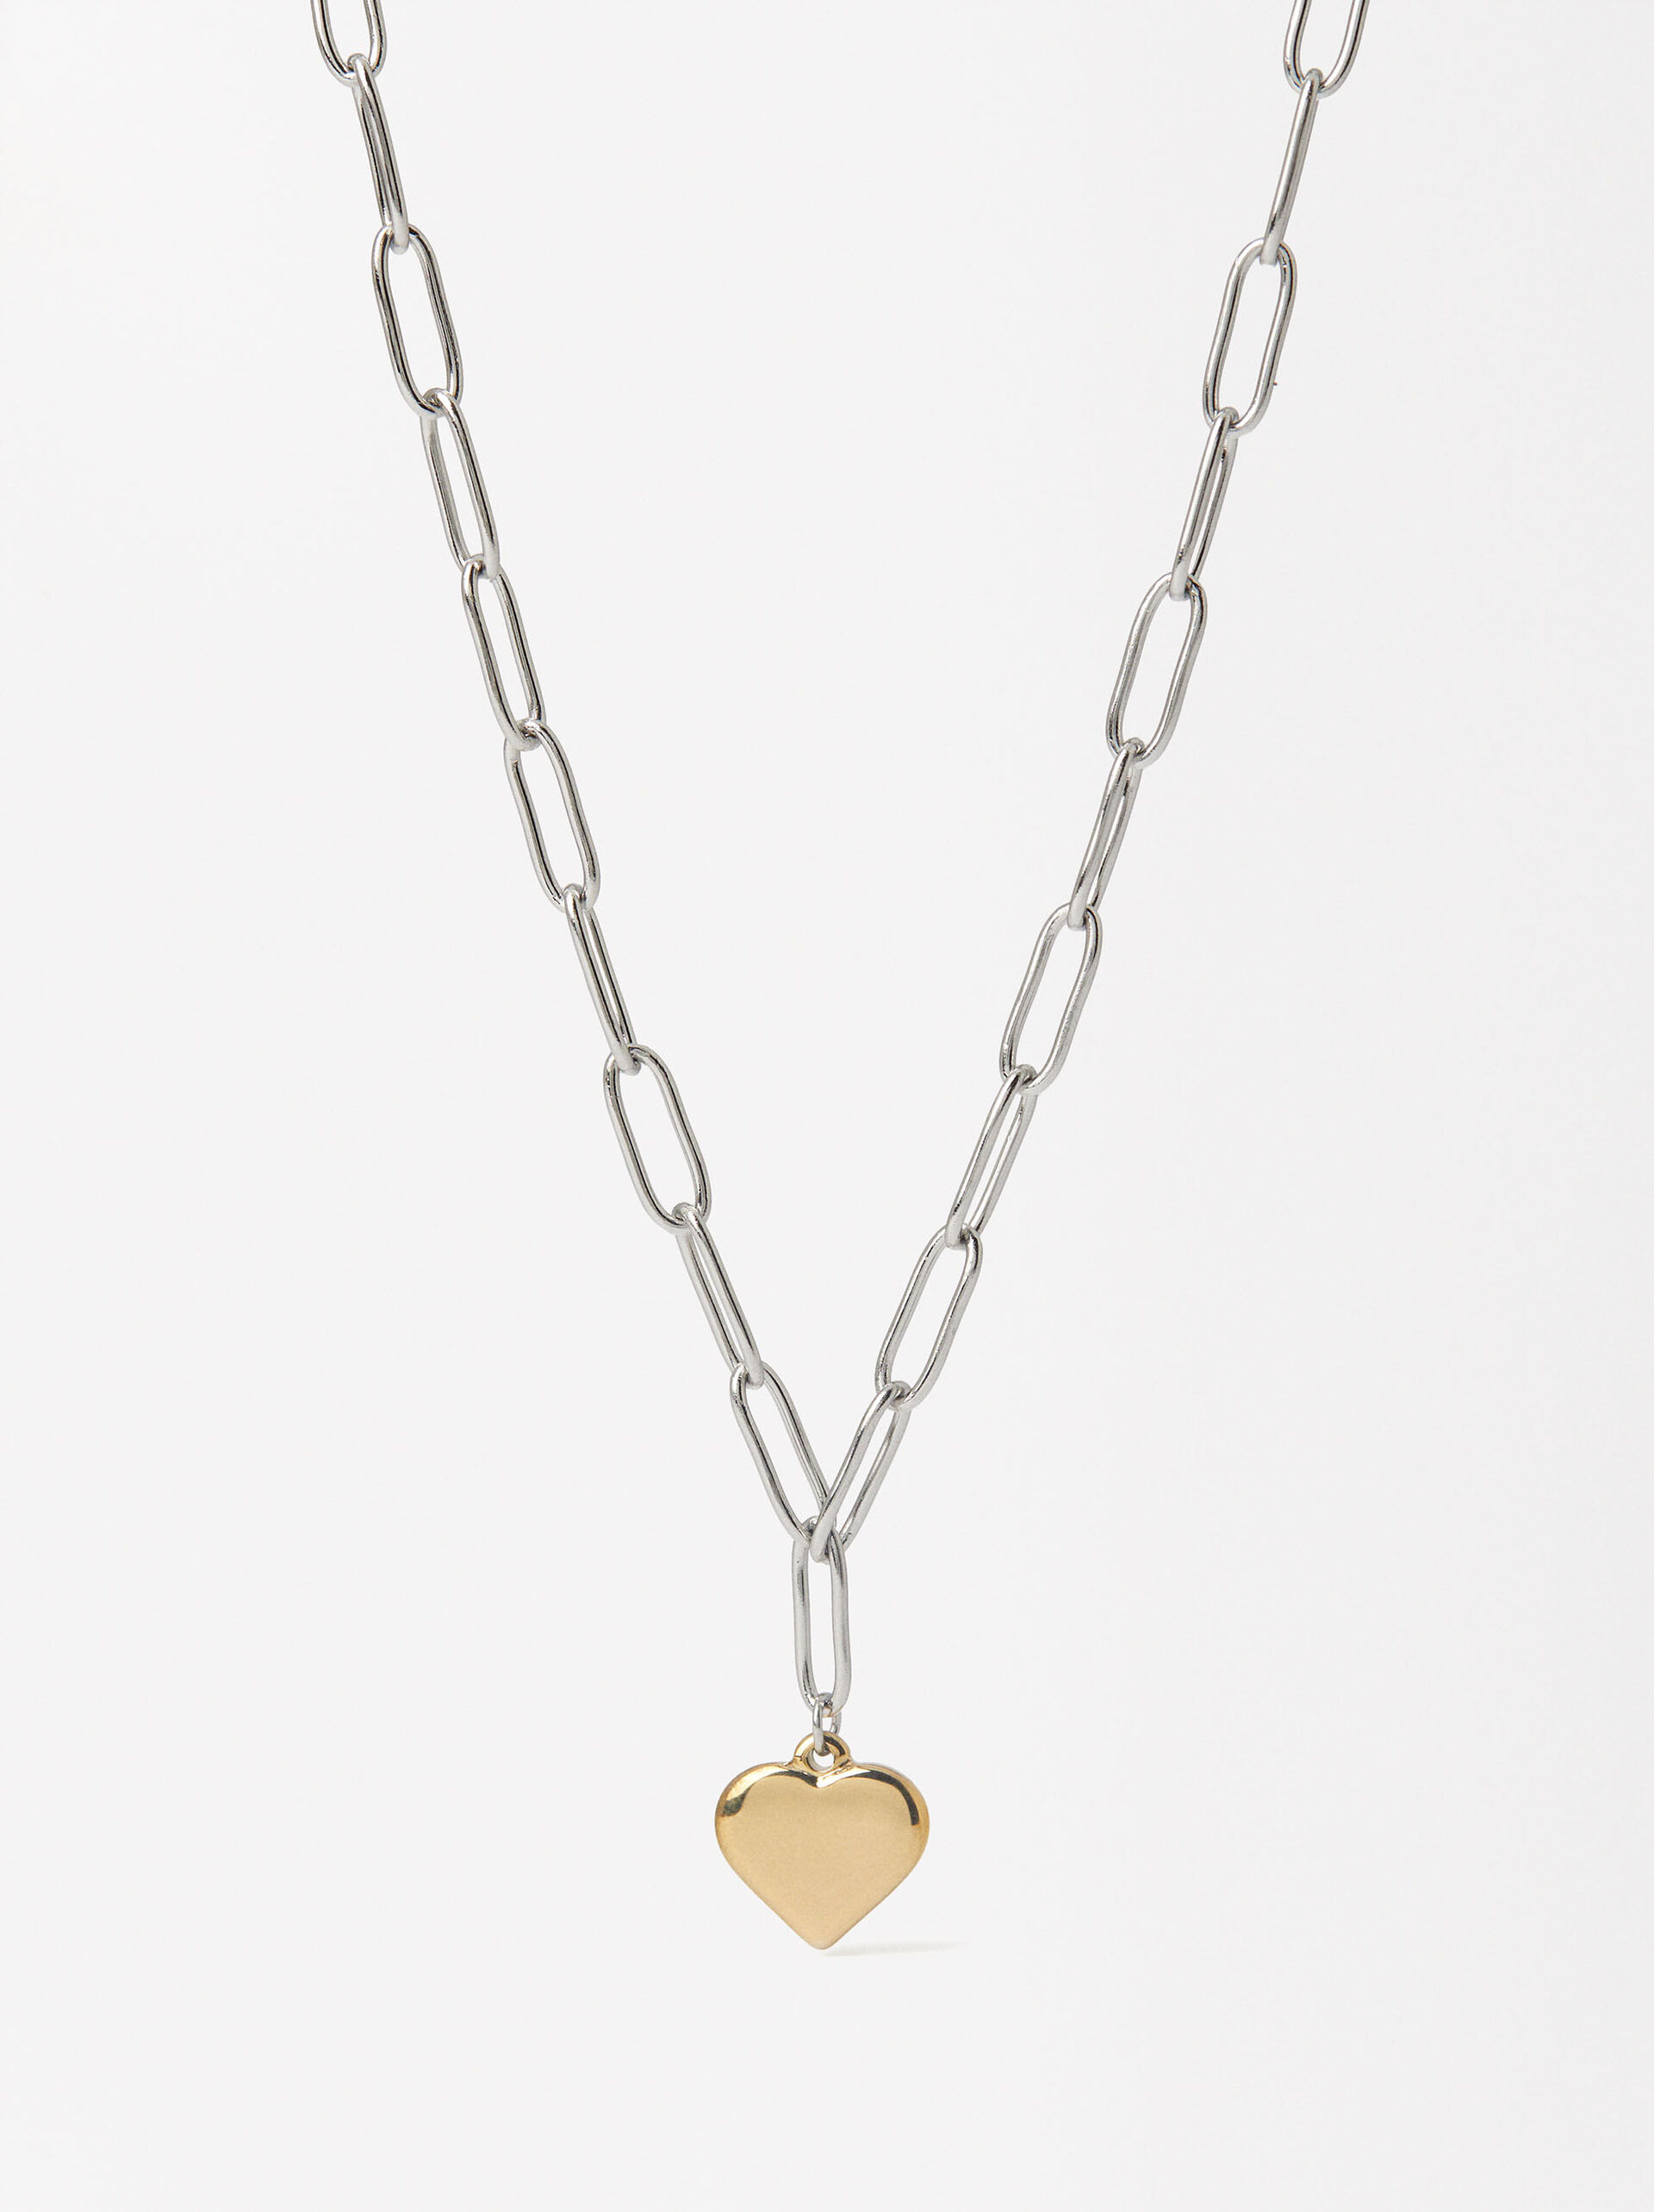 Heart Link Necklace - Stainless Steel image number 2.0